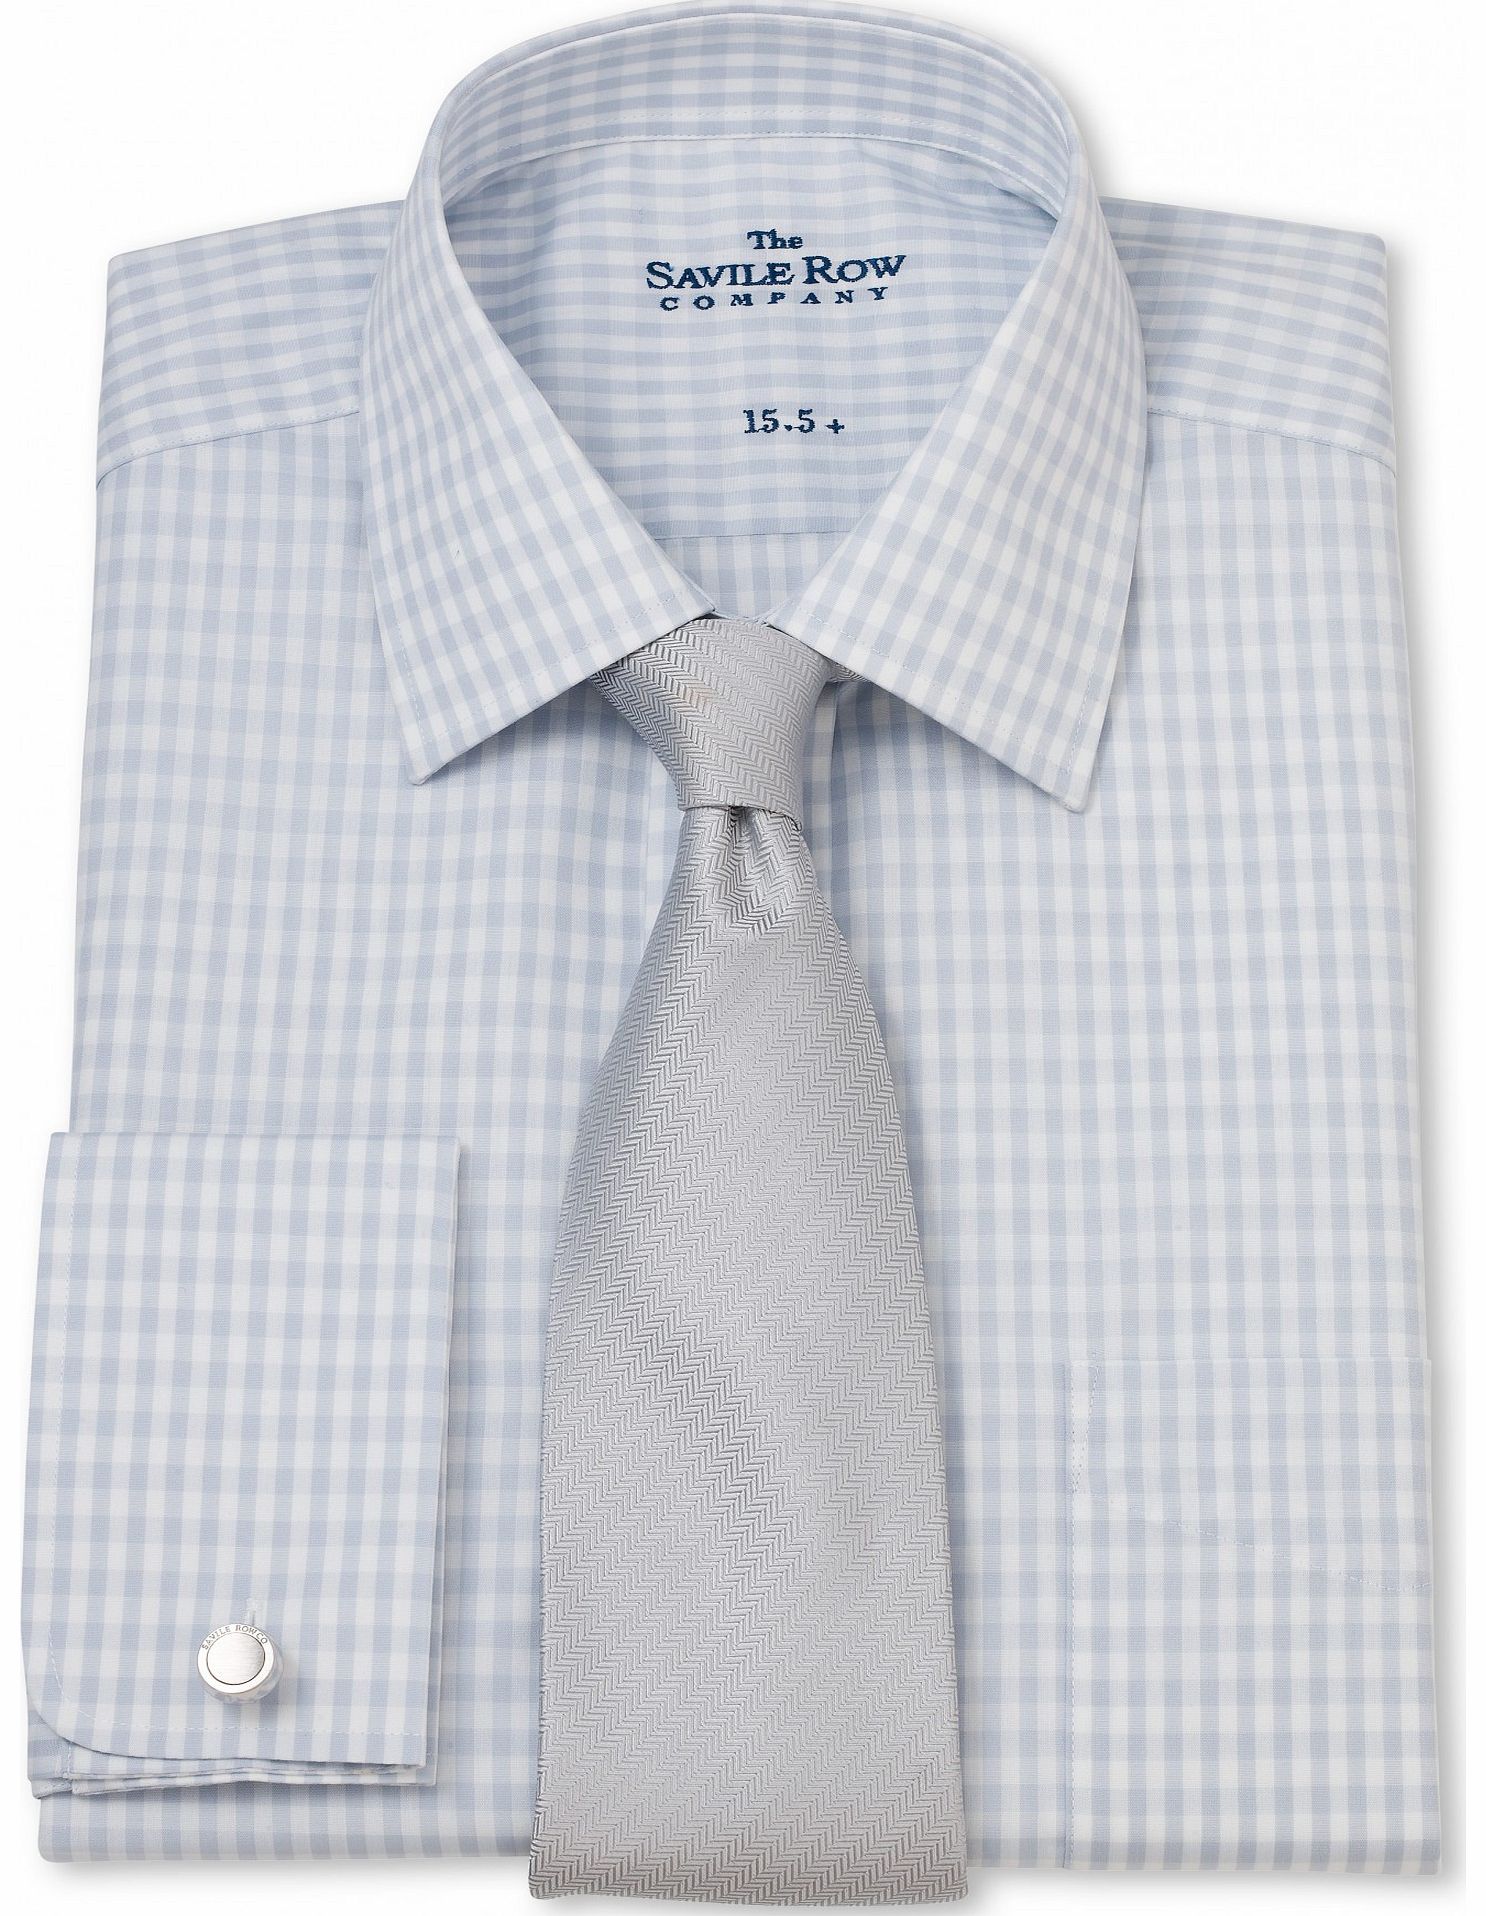 Savile Row Company Grey White Gingham Check Classic Fit Shirt 19``